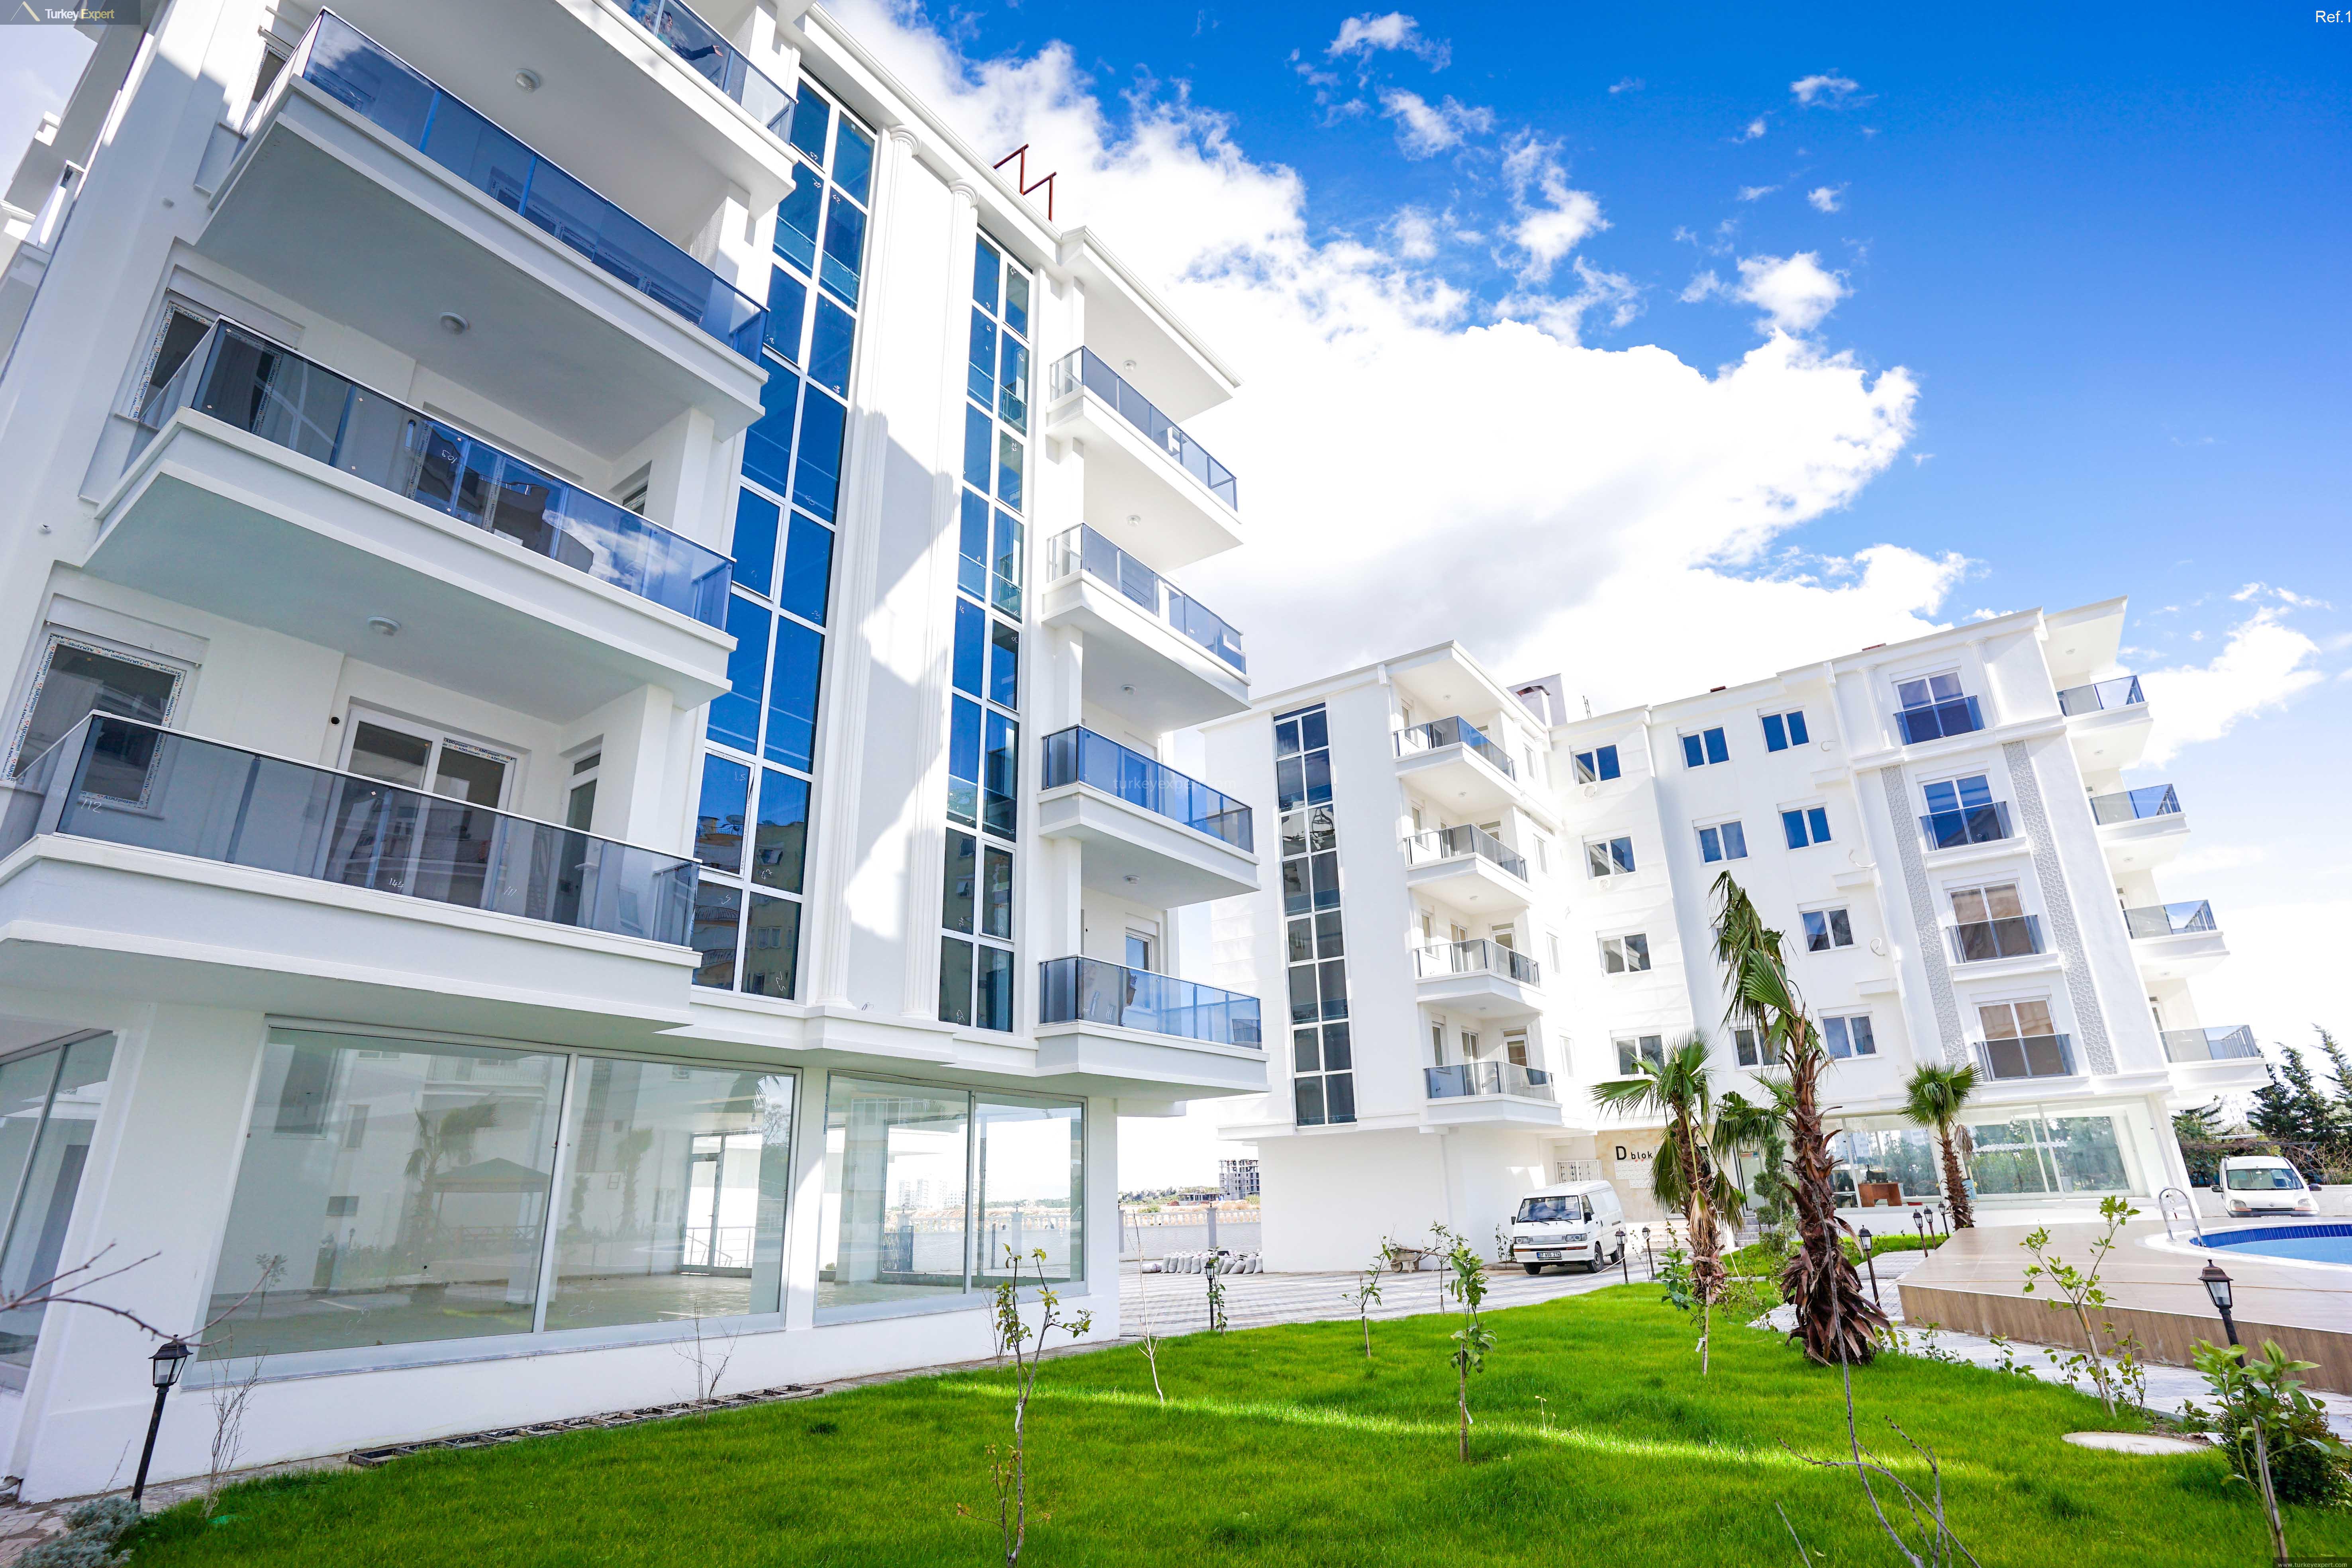 12apartments in a complex with a communal pool in antalya20.